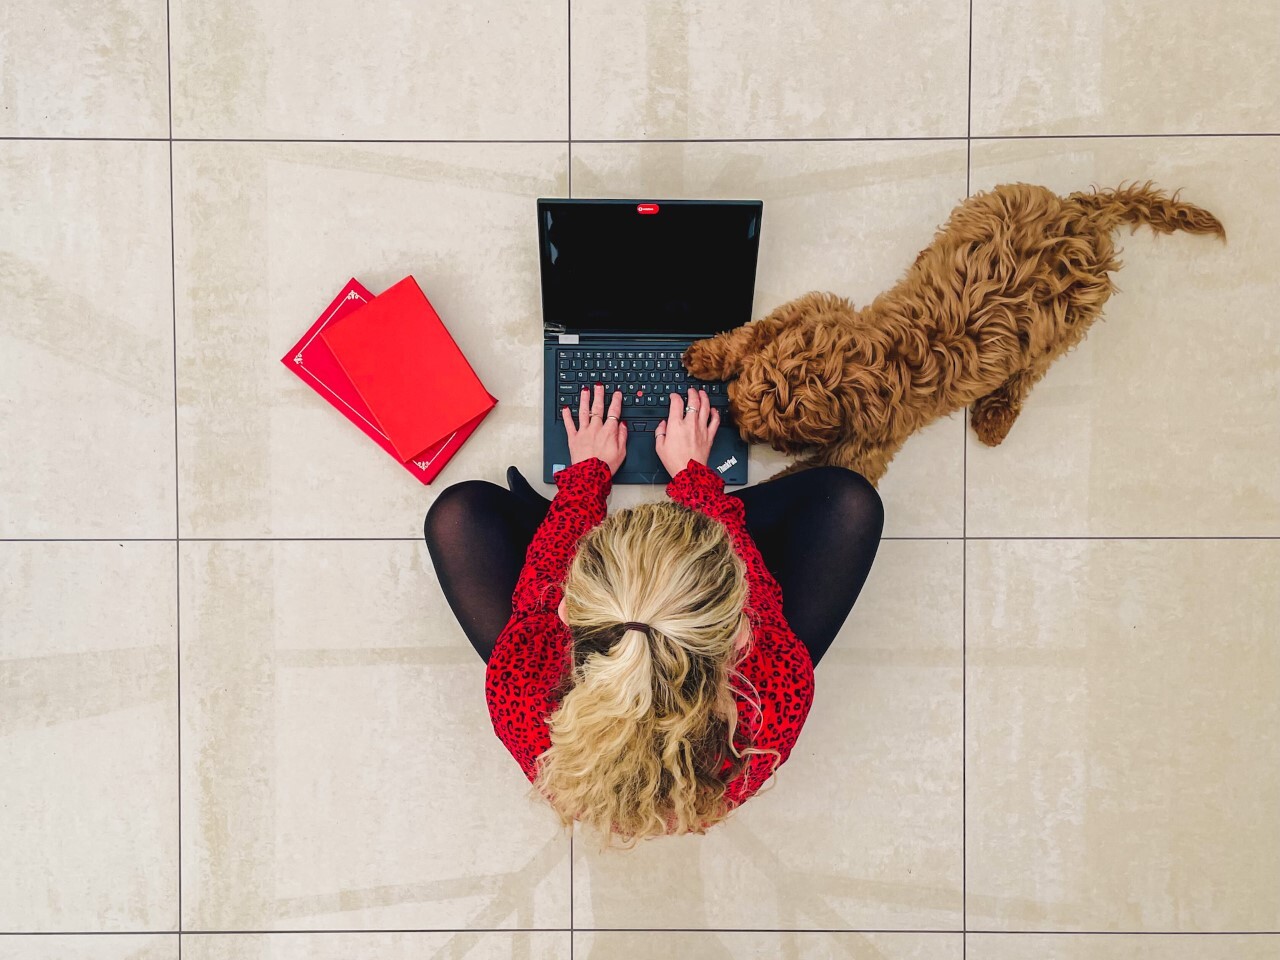 A woman sat on the floor with laptop, dog and red notepad